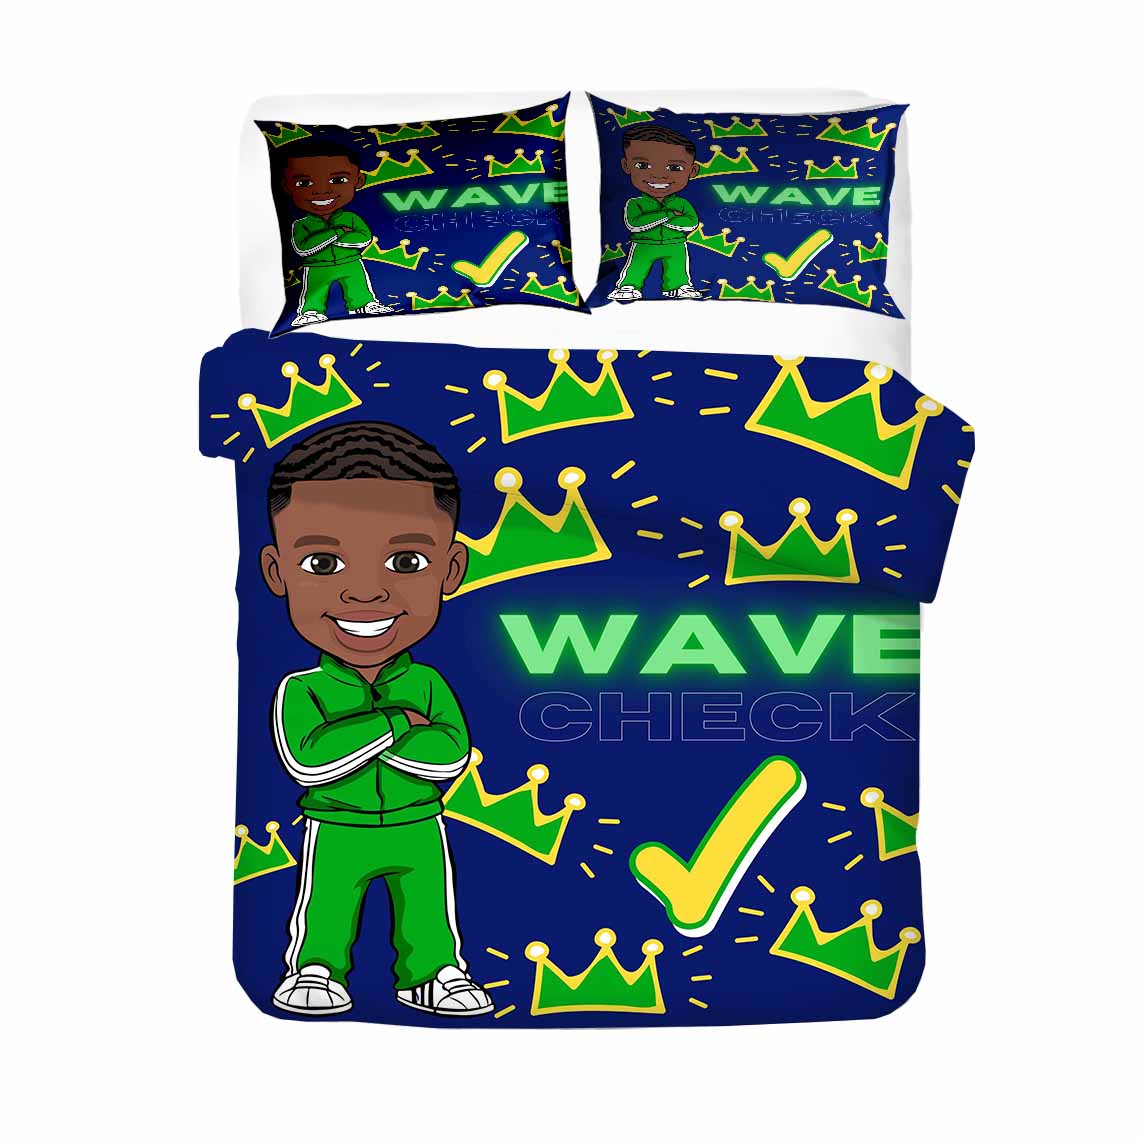 WAVE CHECK Bedtime Story Package TWIN